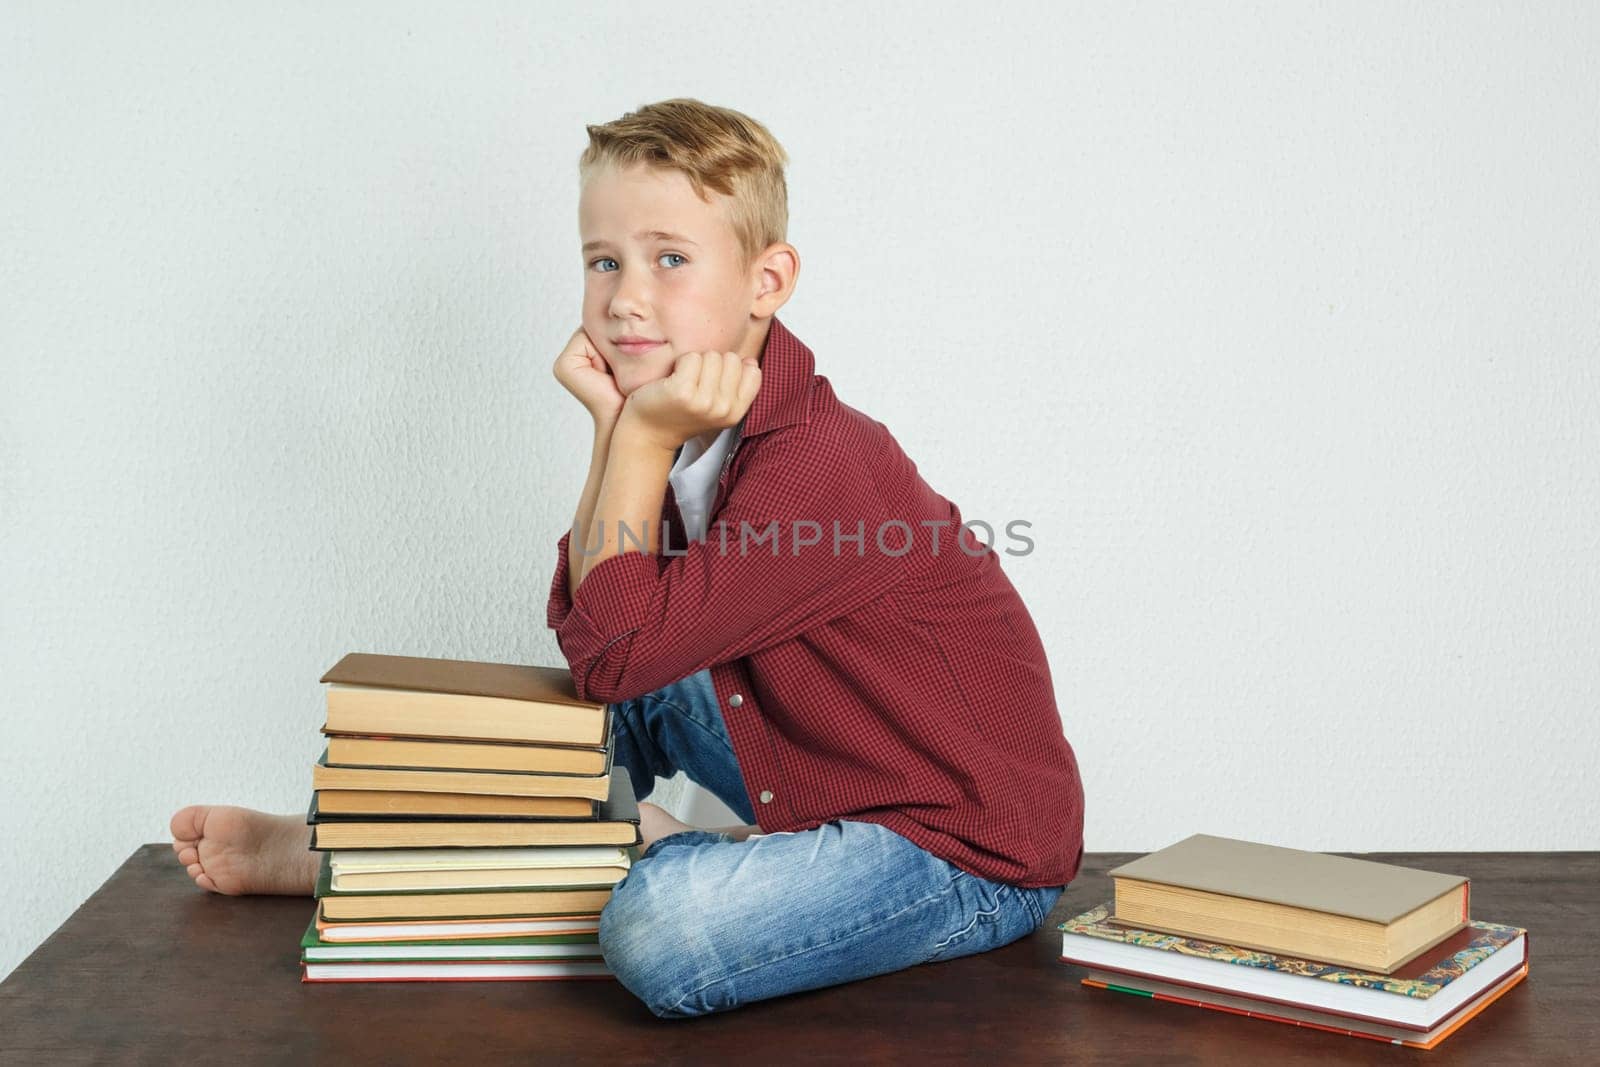 A schoolboy sits on the table near the books, leaning his elbows on them and looks into the cameras. Education concept